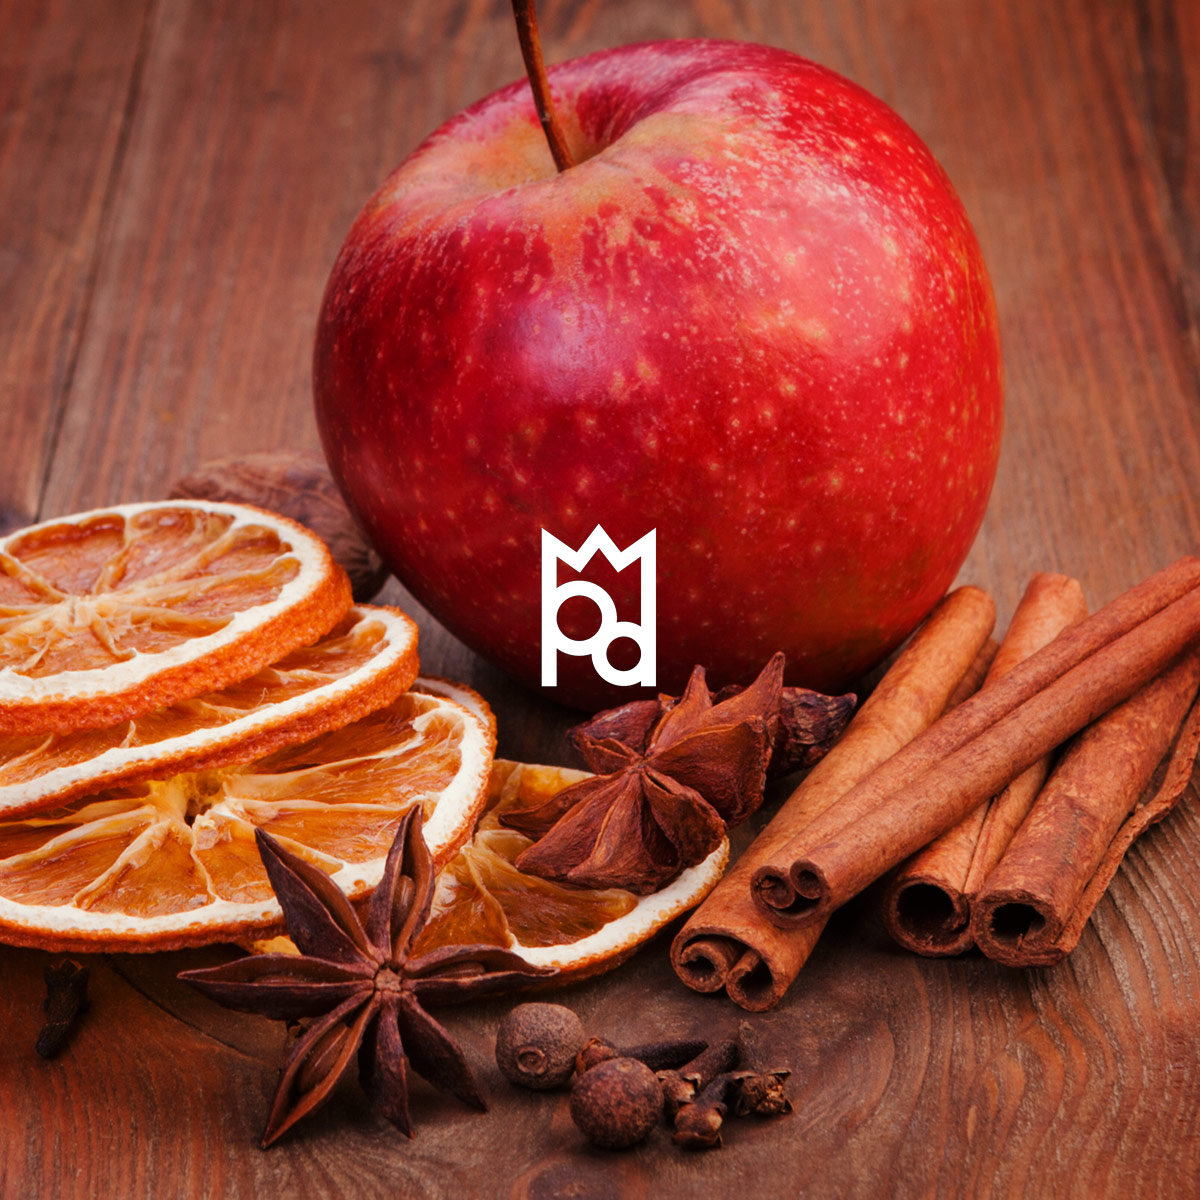 Apple and Cinnamon Fragrance Oil - Spicy & delish from 2,70€